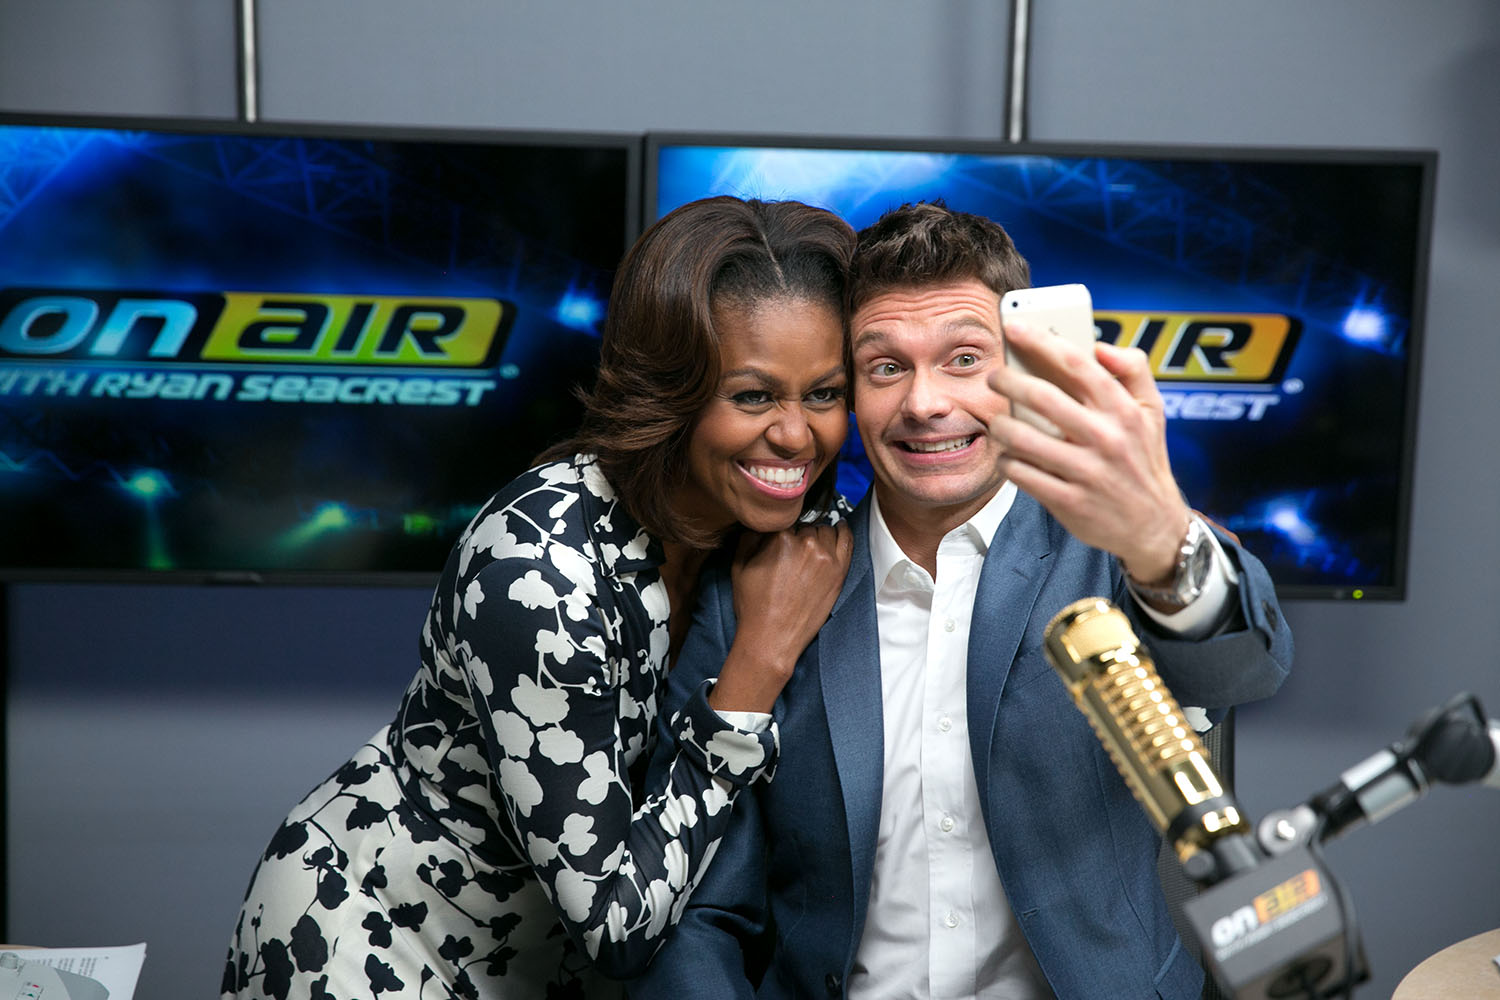 10 Reasons Ryan Seacrest Is Kicking Your Ass1500 x 1000